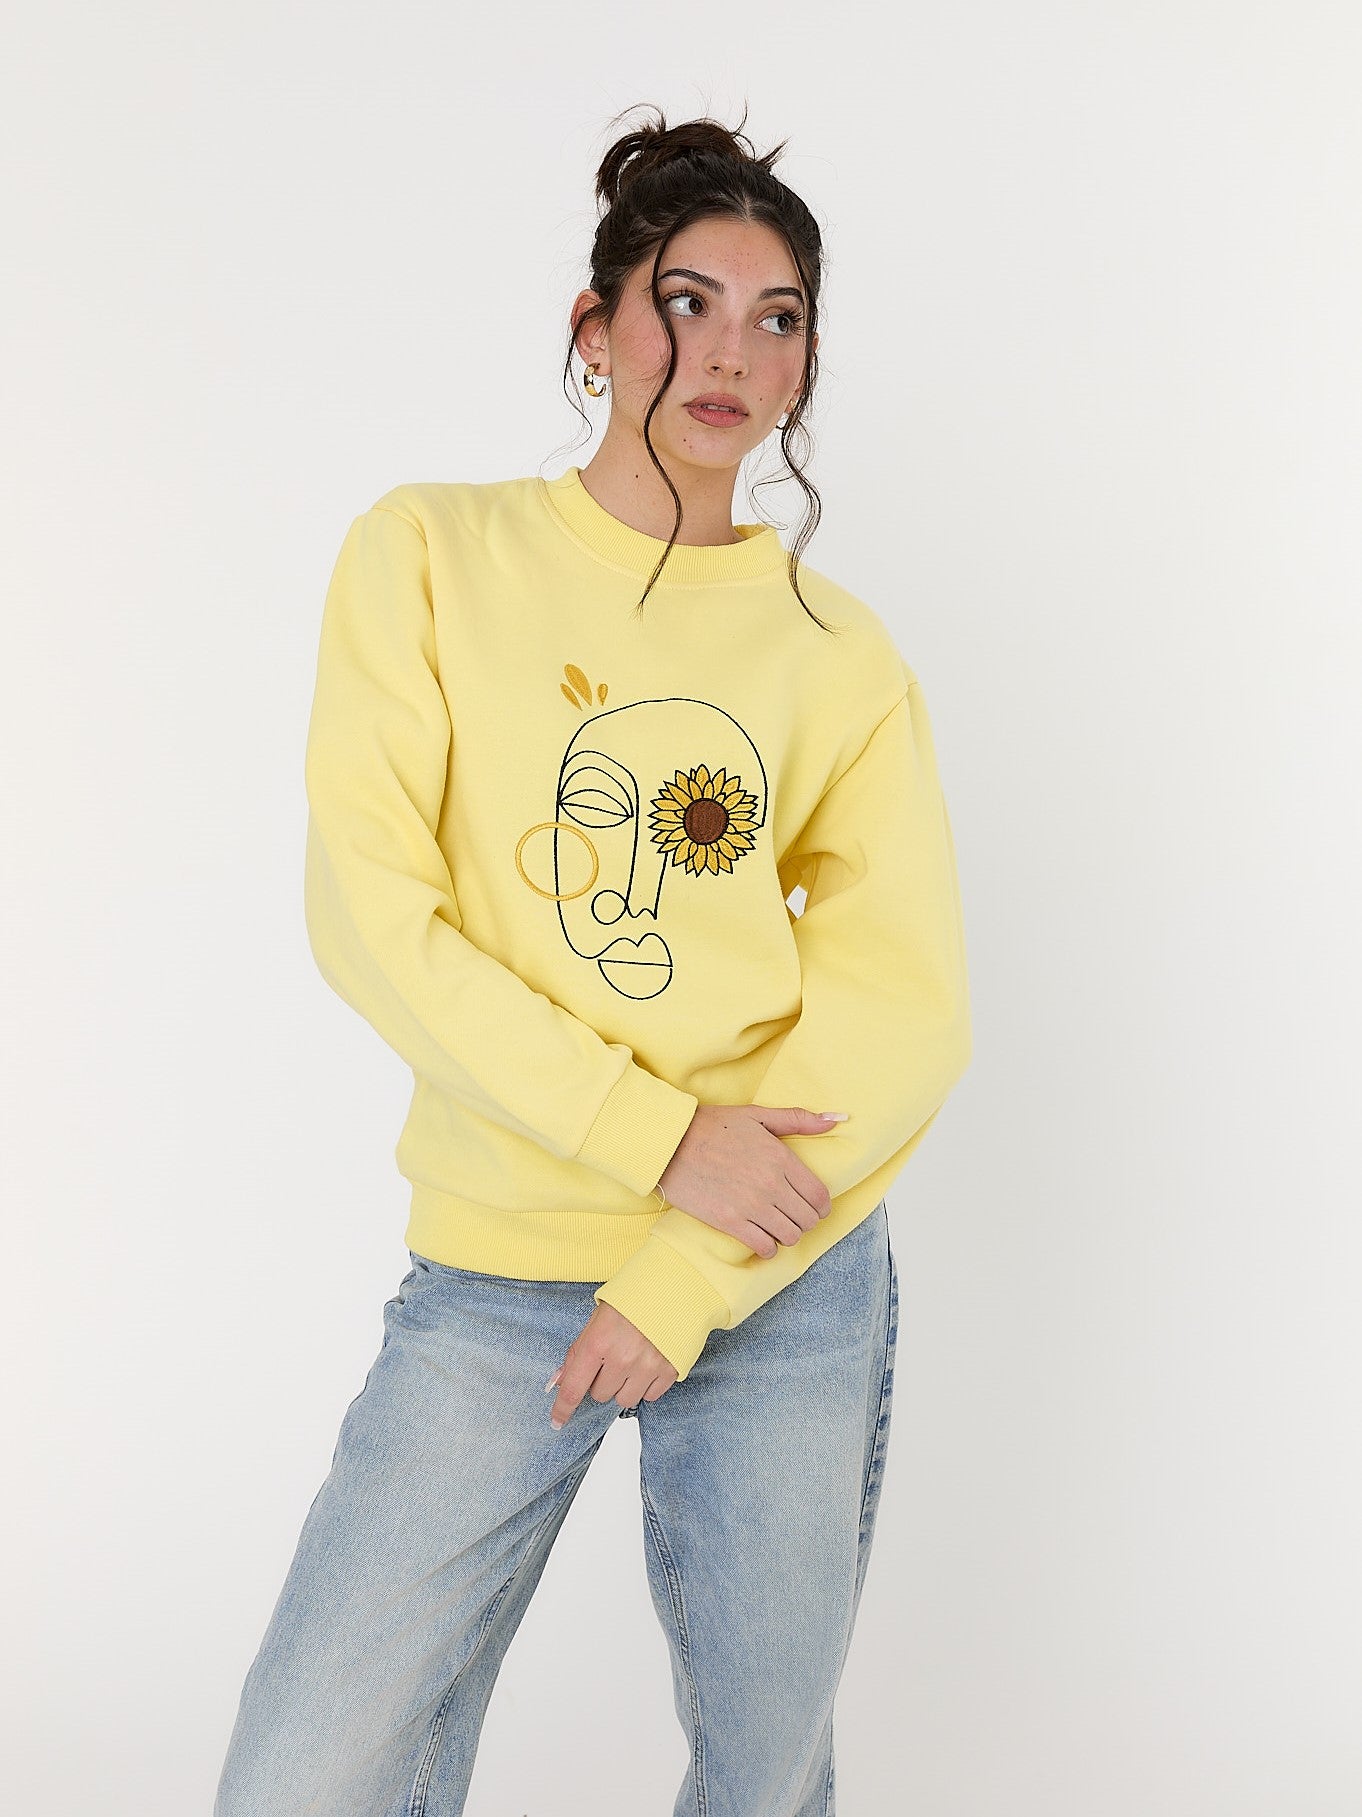 In Their Eyes Yellow Sweater